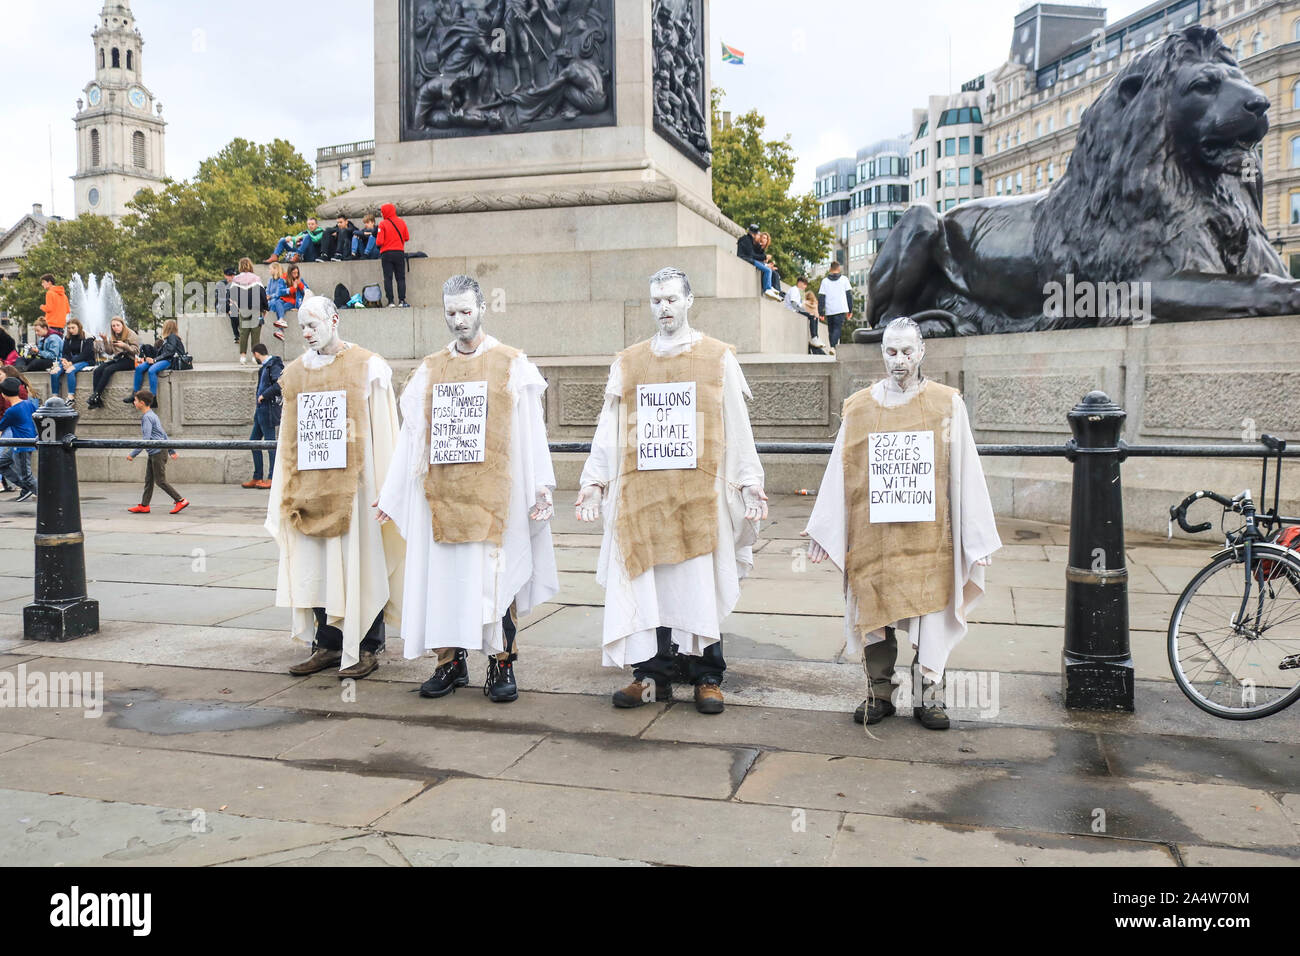 London, UK - 16 October 2019. Climate activists from Extinction rebellion stage a protest vigil in Trafalgar Square to demonstrate against section 14 of the public order act 1986 issued  by the Police banning protests. Extinction Rebellion has sought a judicial review to challenge a London-wide protest ban in the High courts Credit: amer ghazzal/Alamy Live News Stock Photo